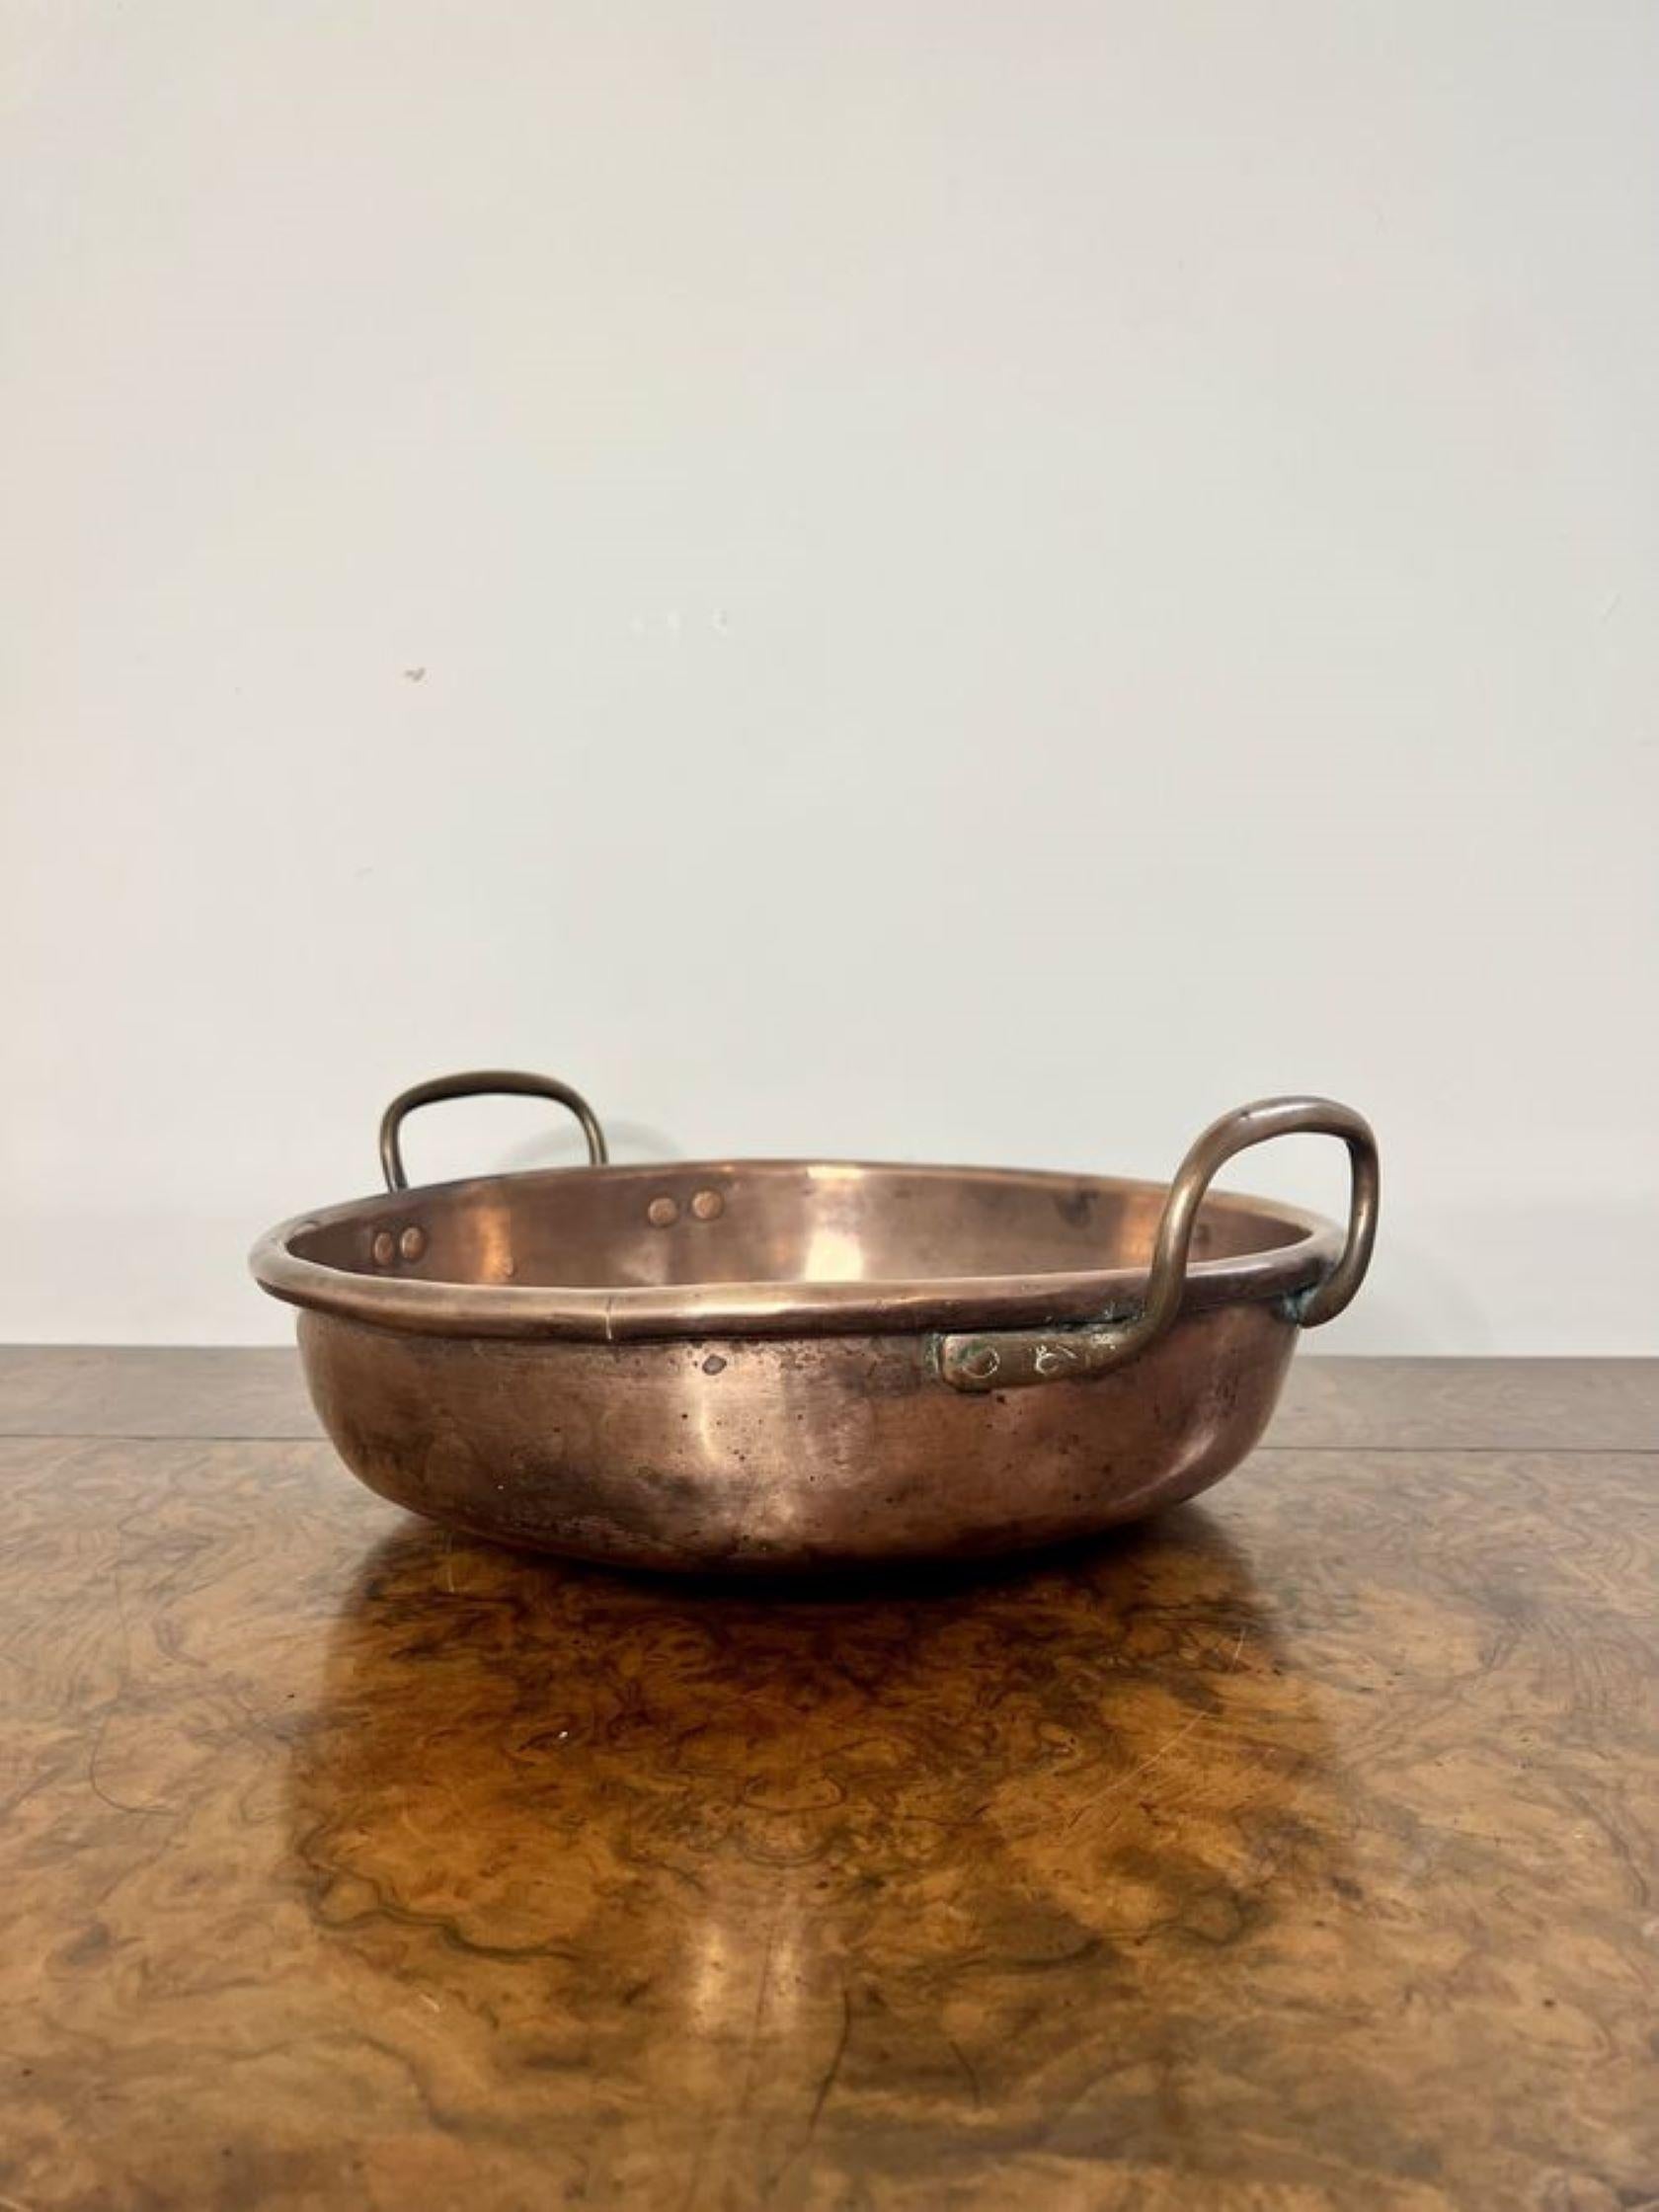 Quality antique George III copper pan having a quality circular copper pan with two shaped carrying handles to the sides.

D. 1800